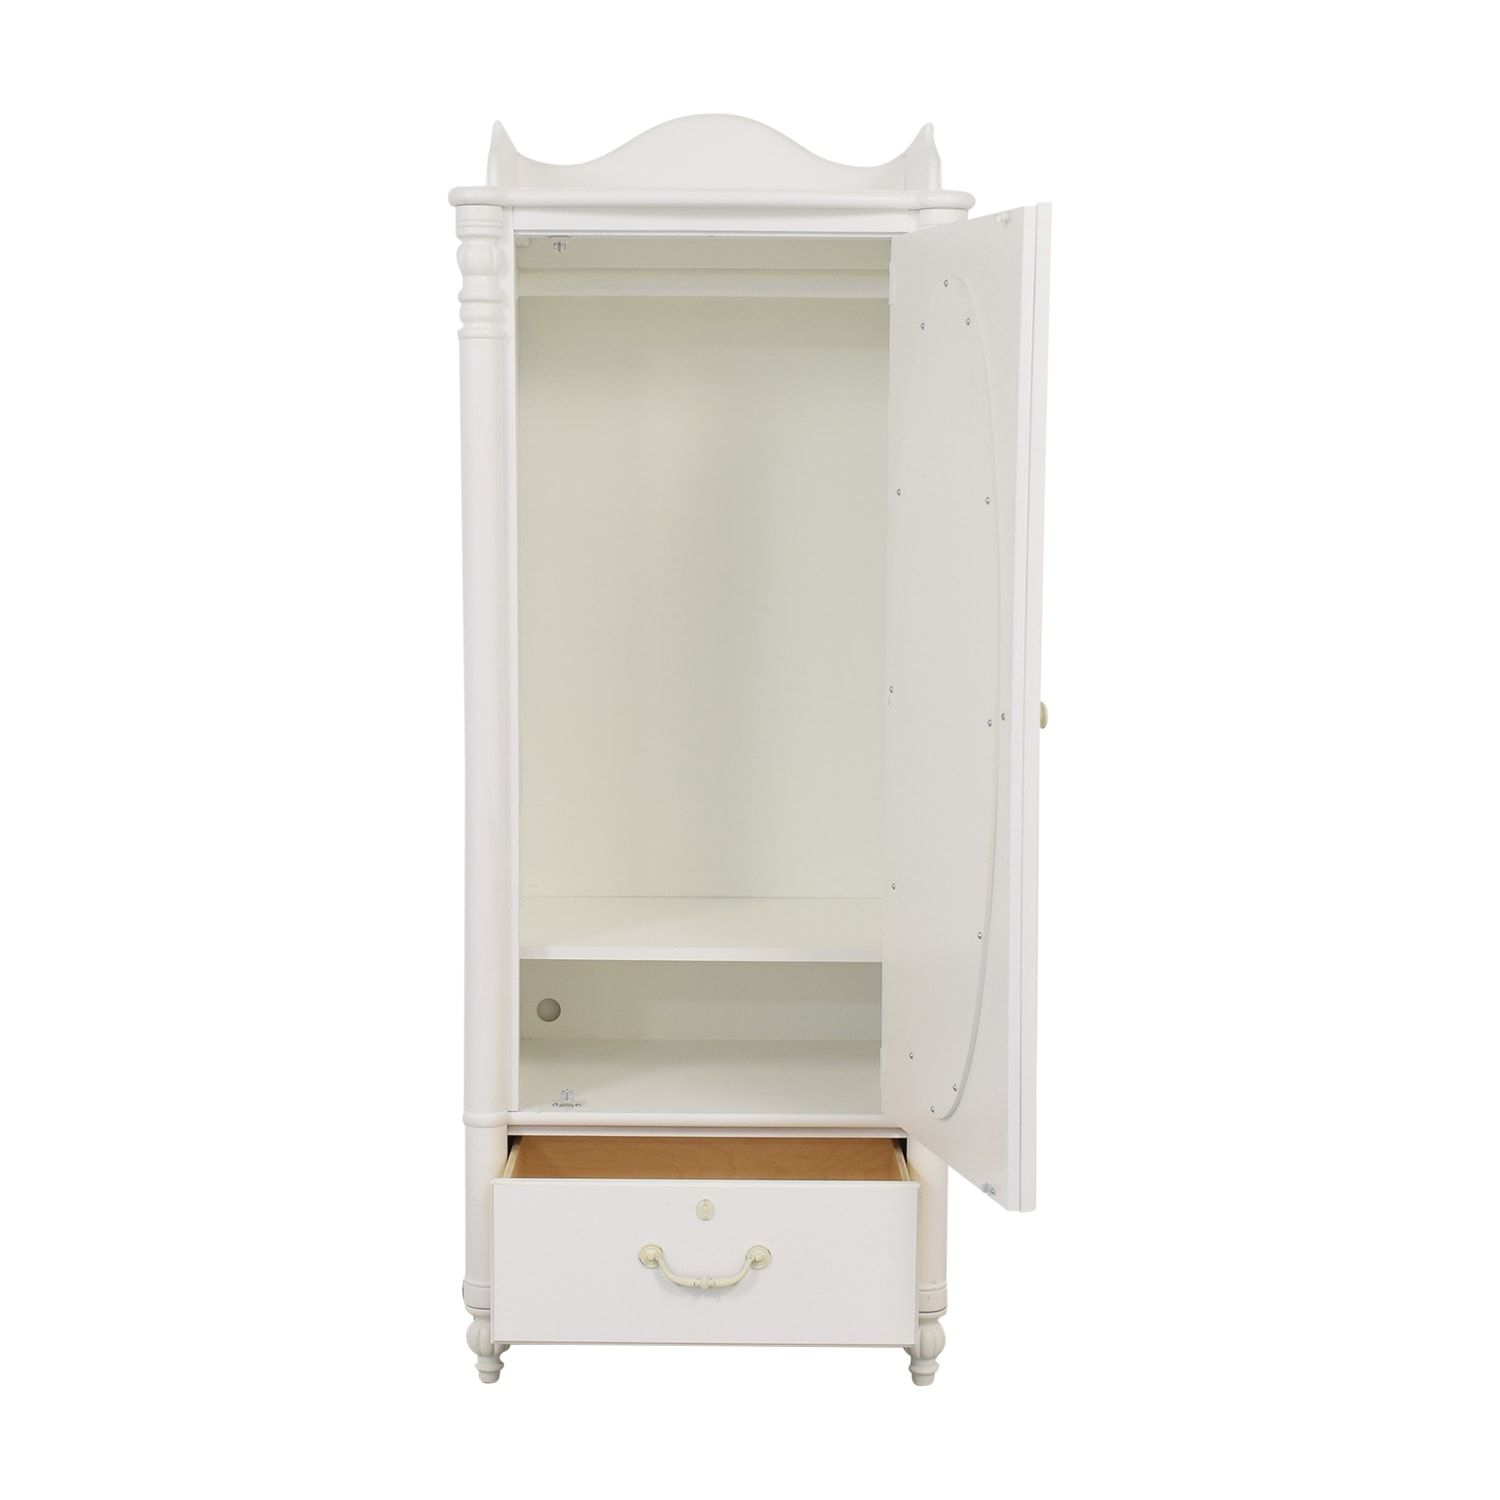 Stanley Furniture Cameo Armoire | 68% Off | Kaiyo Within Cameo Wardrobes (View 4 of 15)